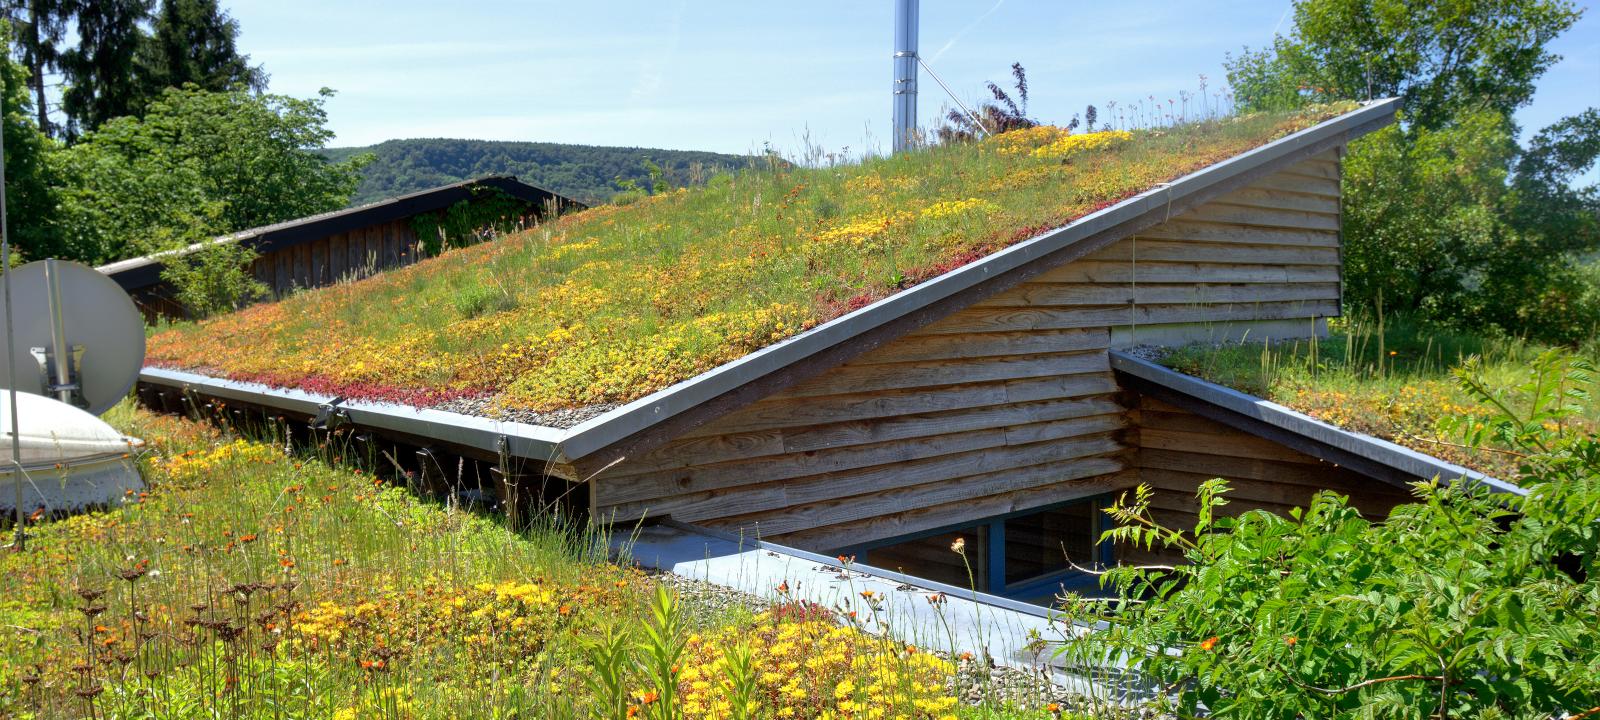 Pitched green roof